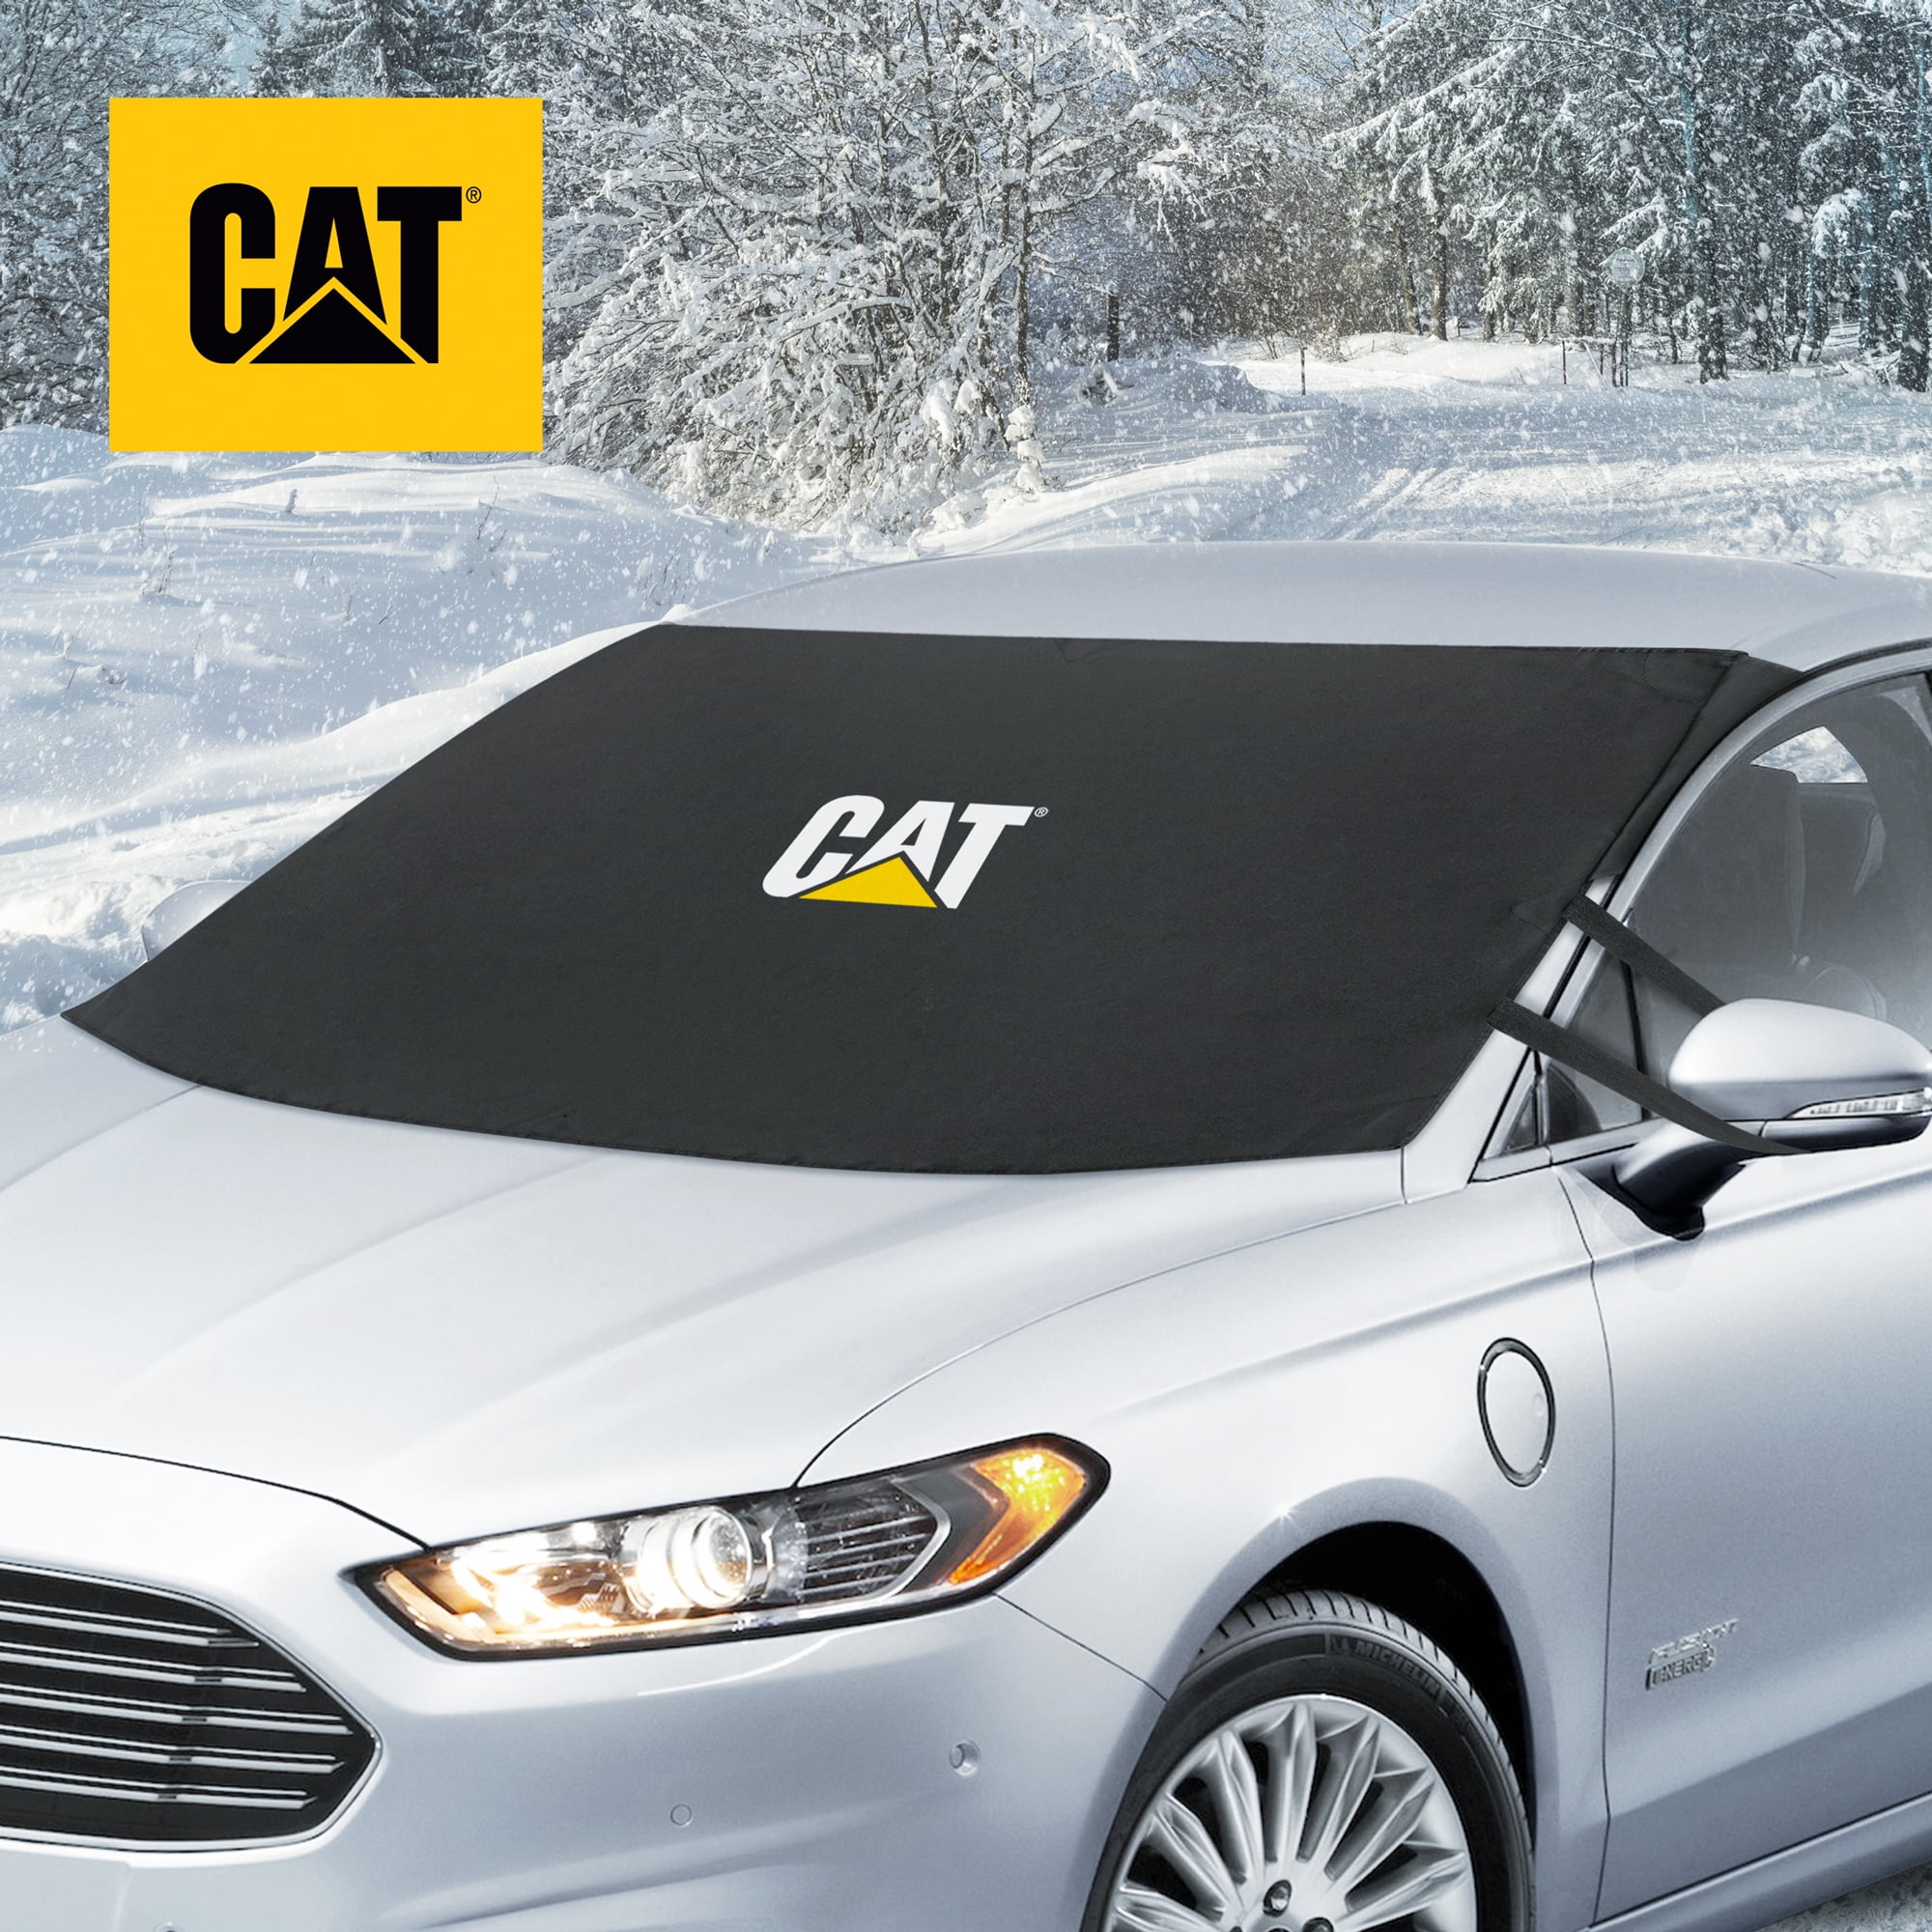 How To Choose The Right Car Windshield Covers For Snow And Ice, by  Iceandsunshield